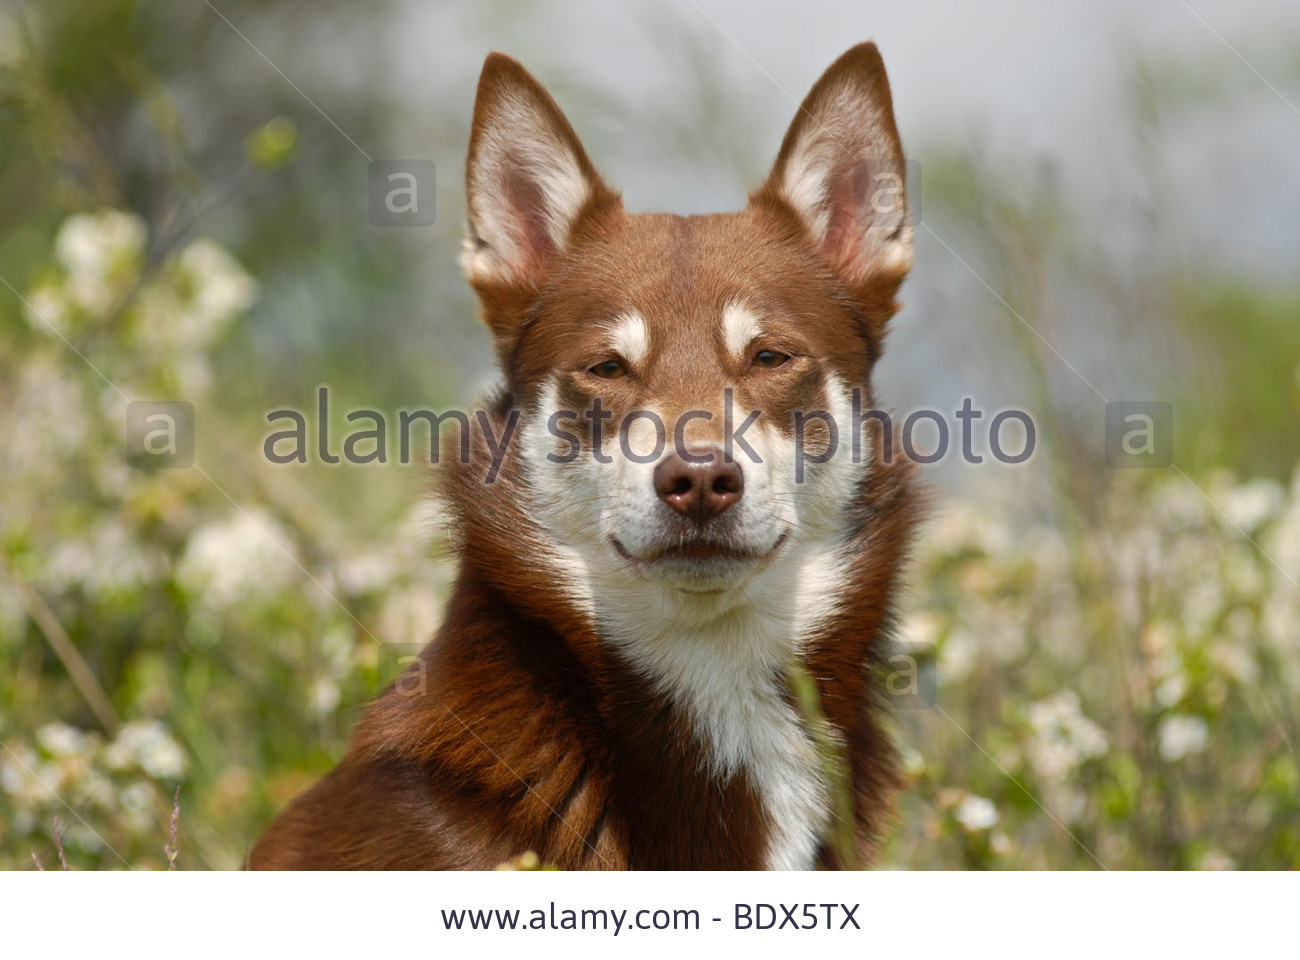 Lapponian Herder Dog: Lapponian Stock Lapponian Herder Lapinporokoira Or Lapp Reindeer Dog Portrait In A Breed